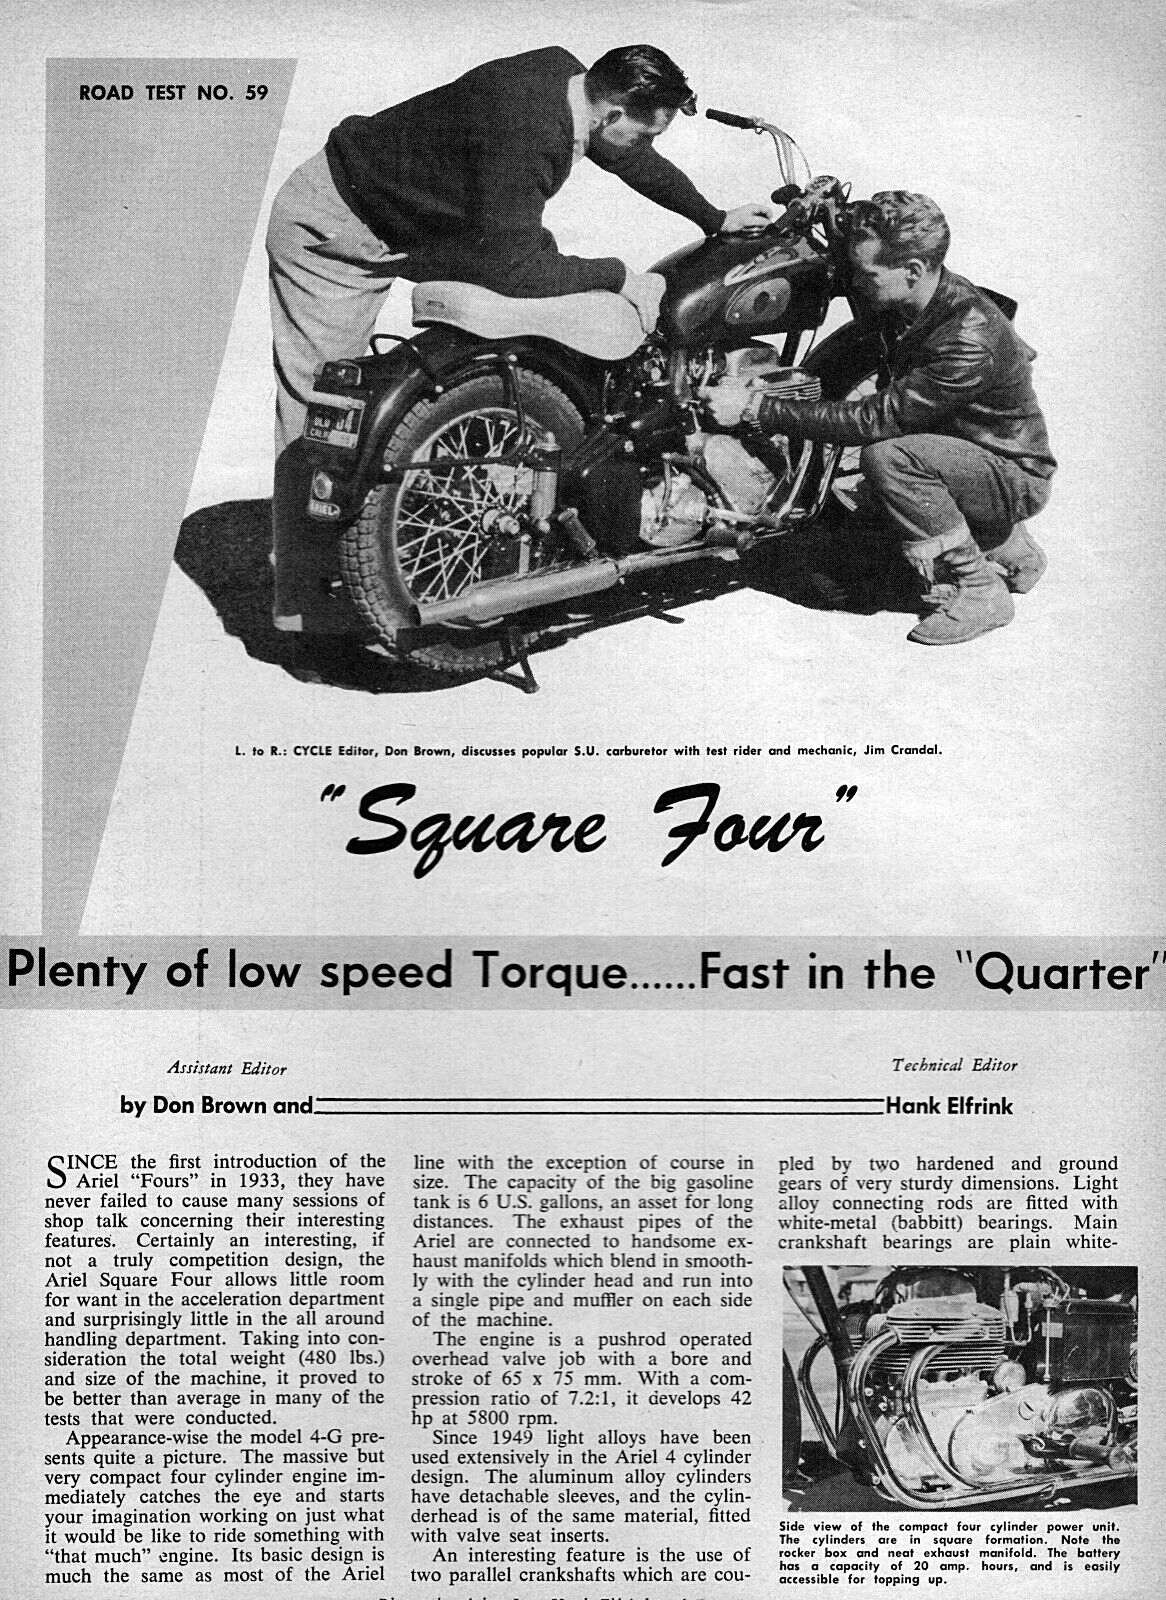 1955 Ariel Square Four Motorcycle - Original 3-page Road Test Article